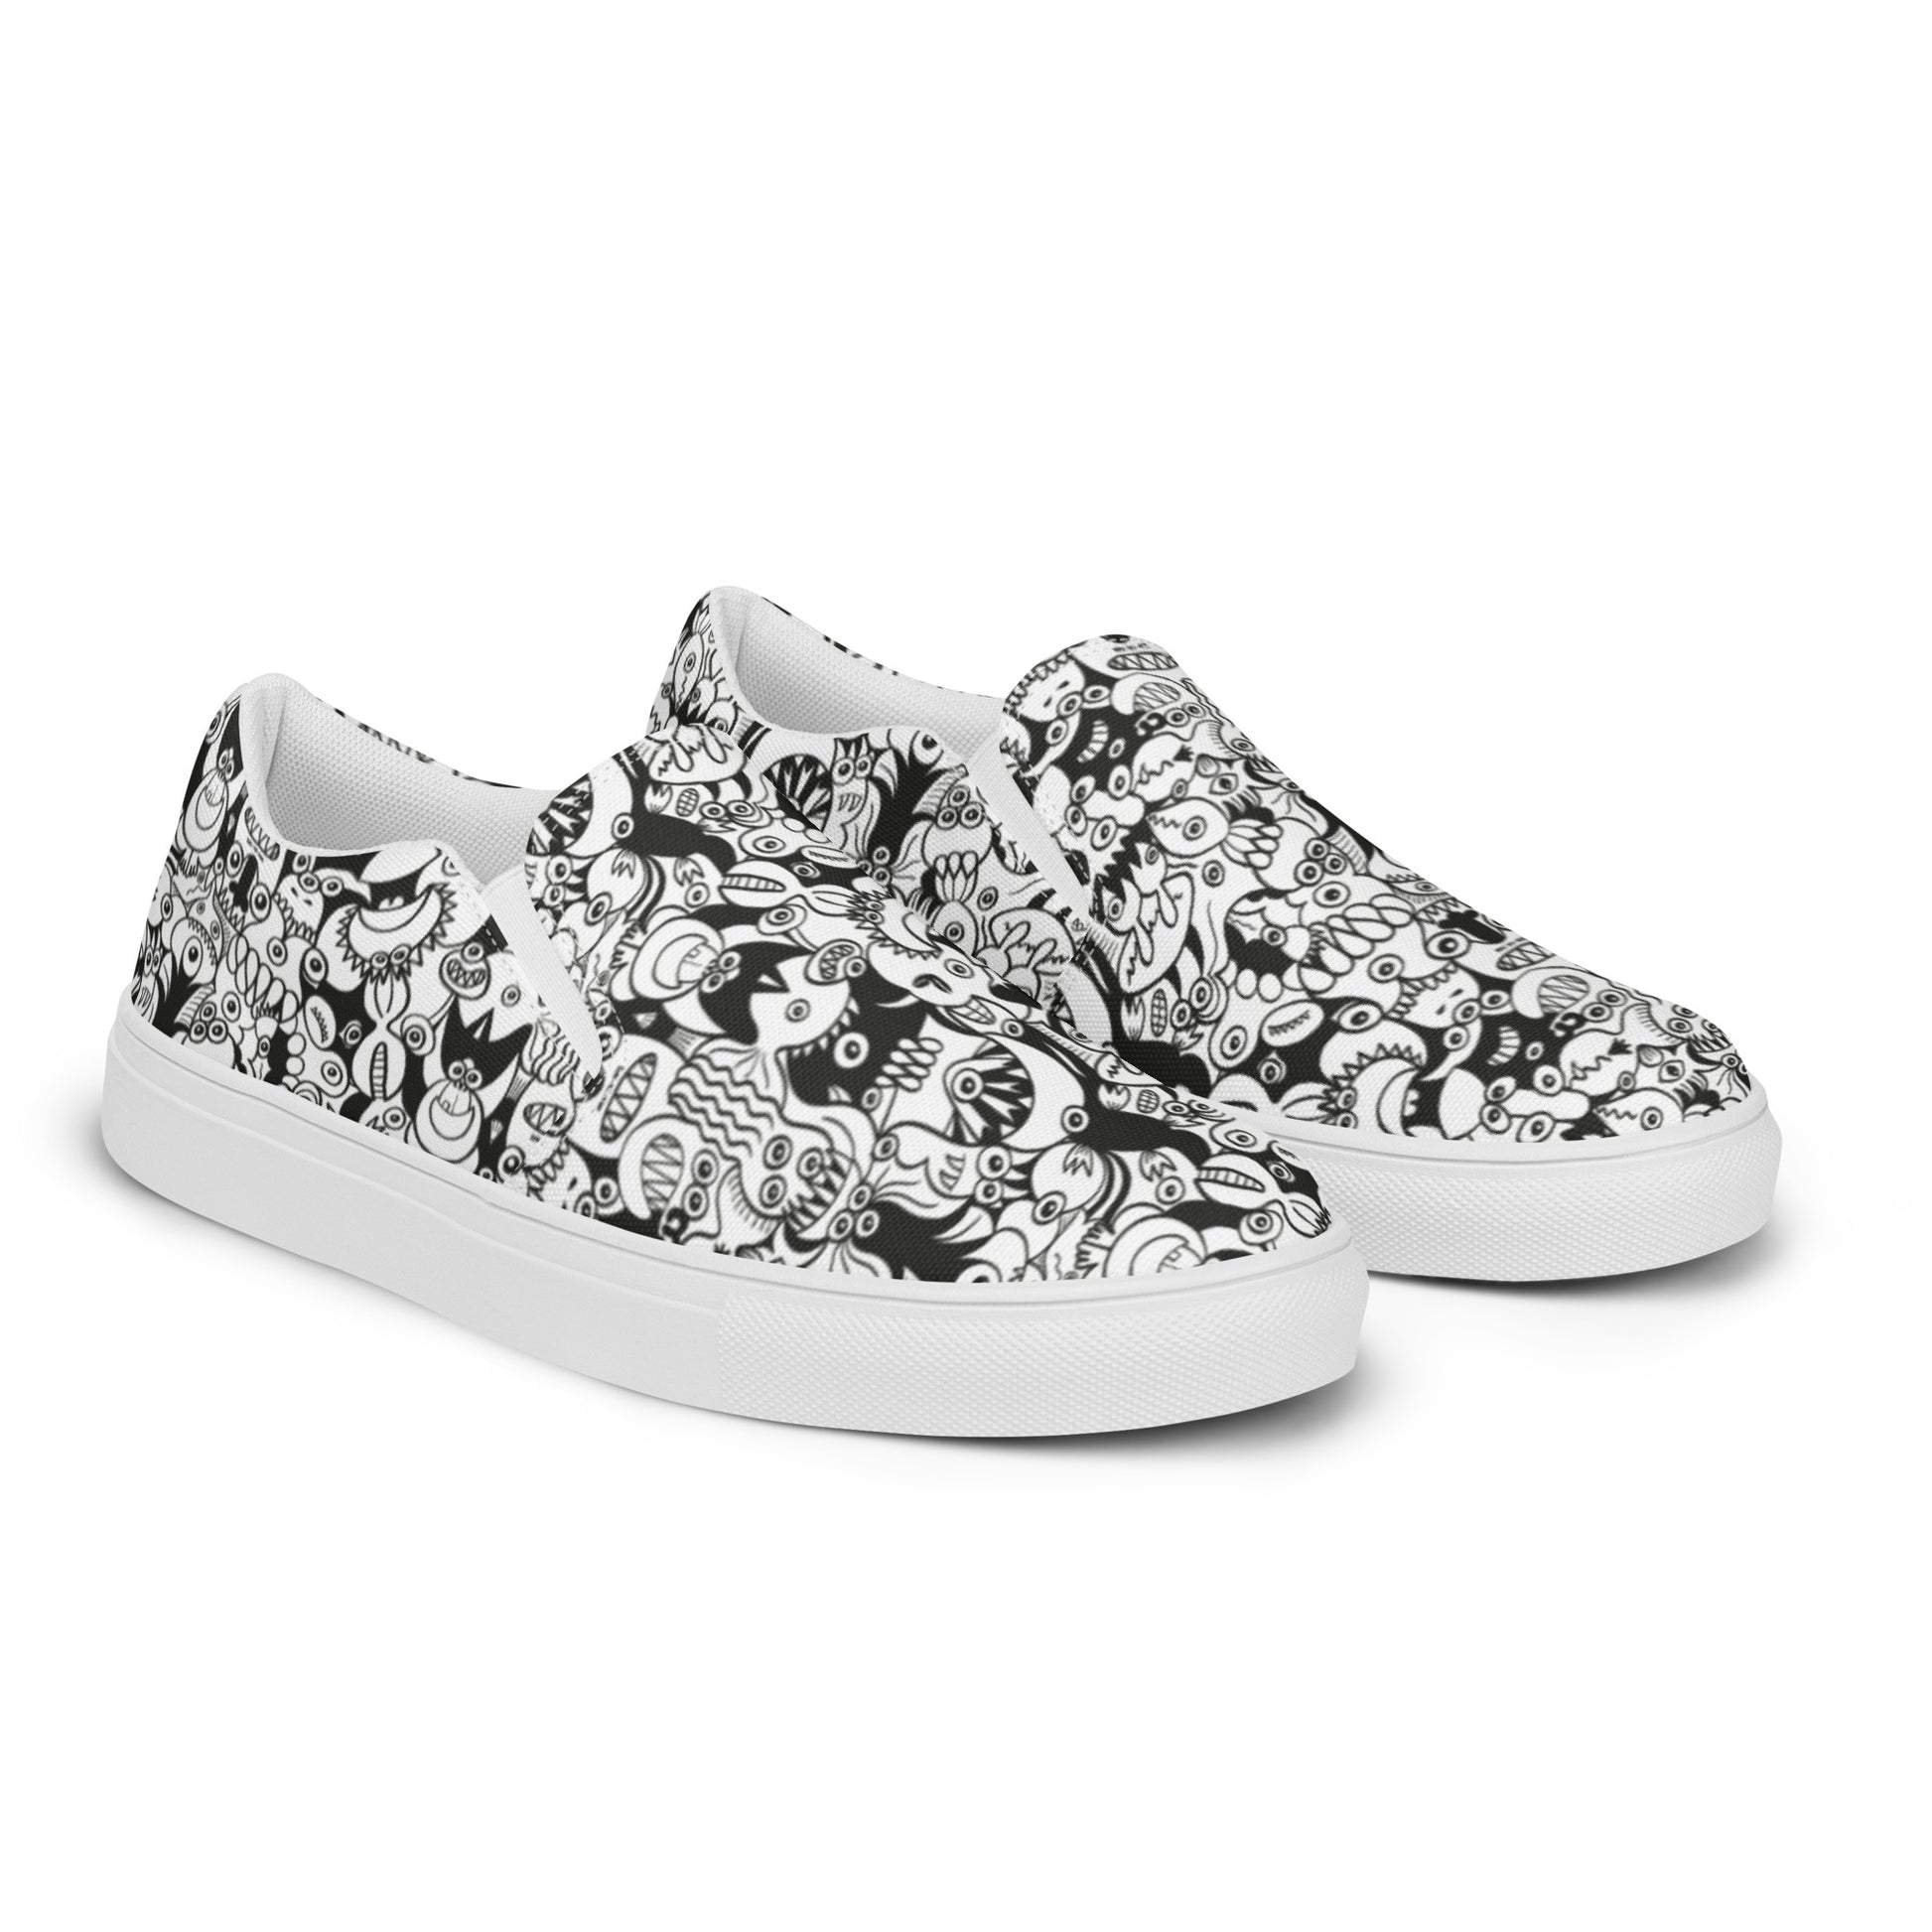 Black and white cool doodles art Women’s slip-on canvas shoes. Overview